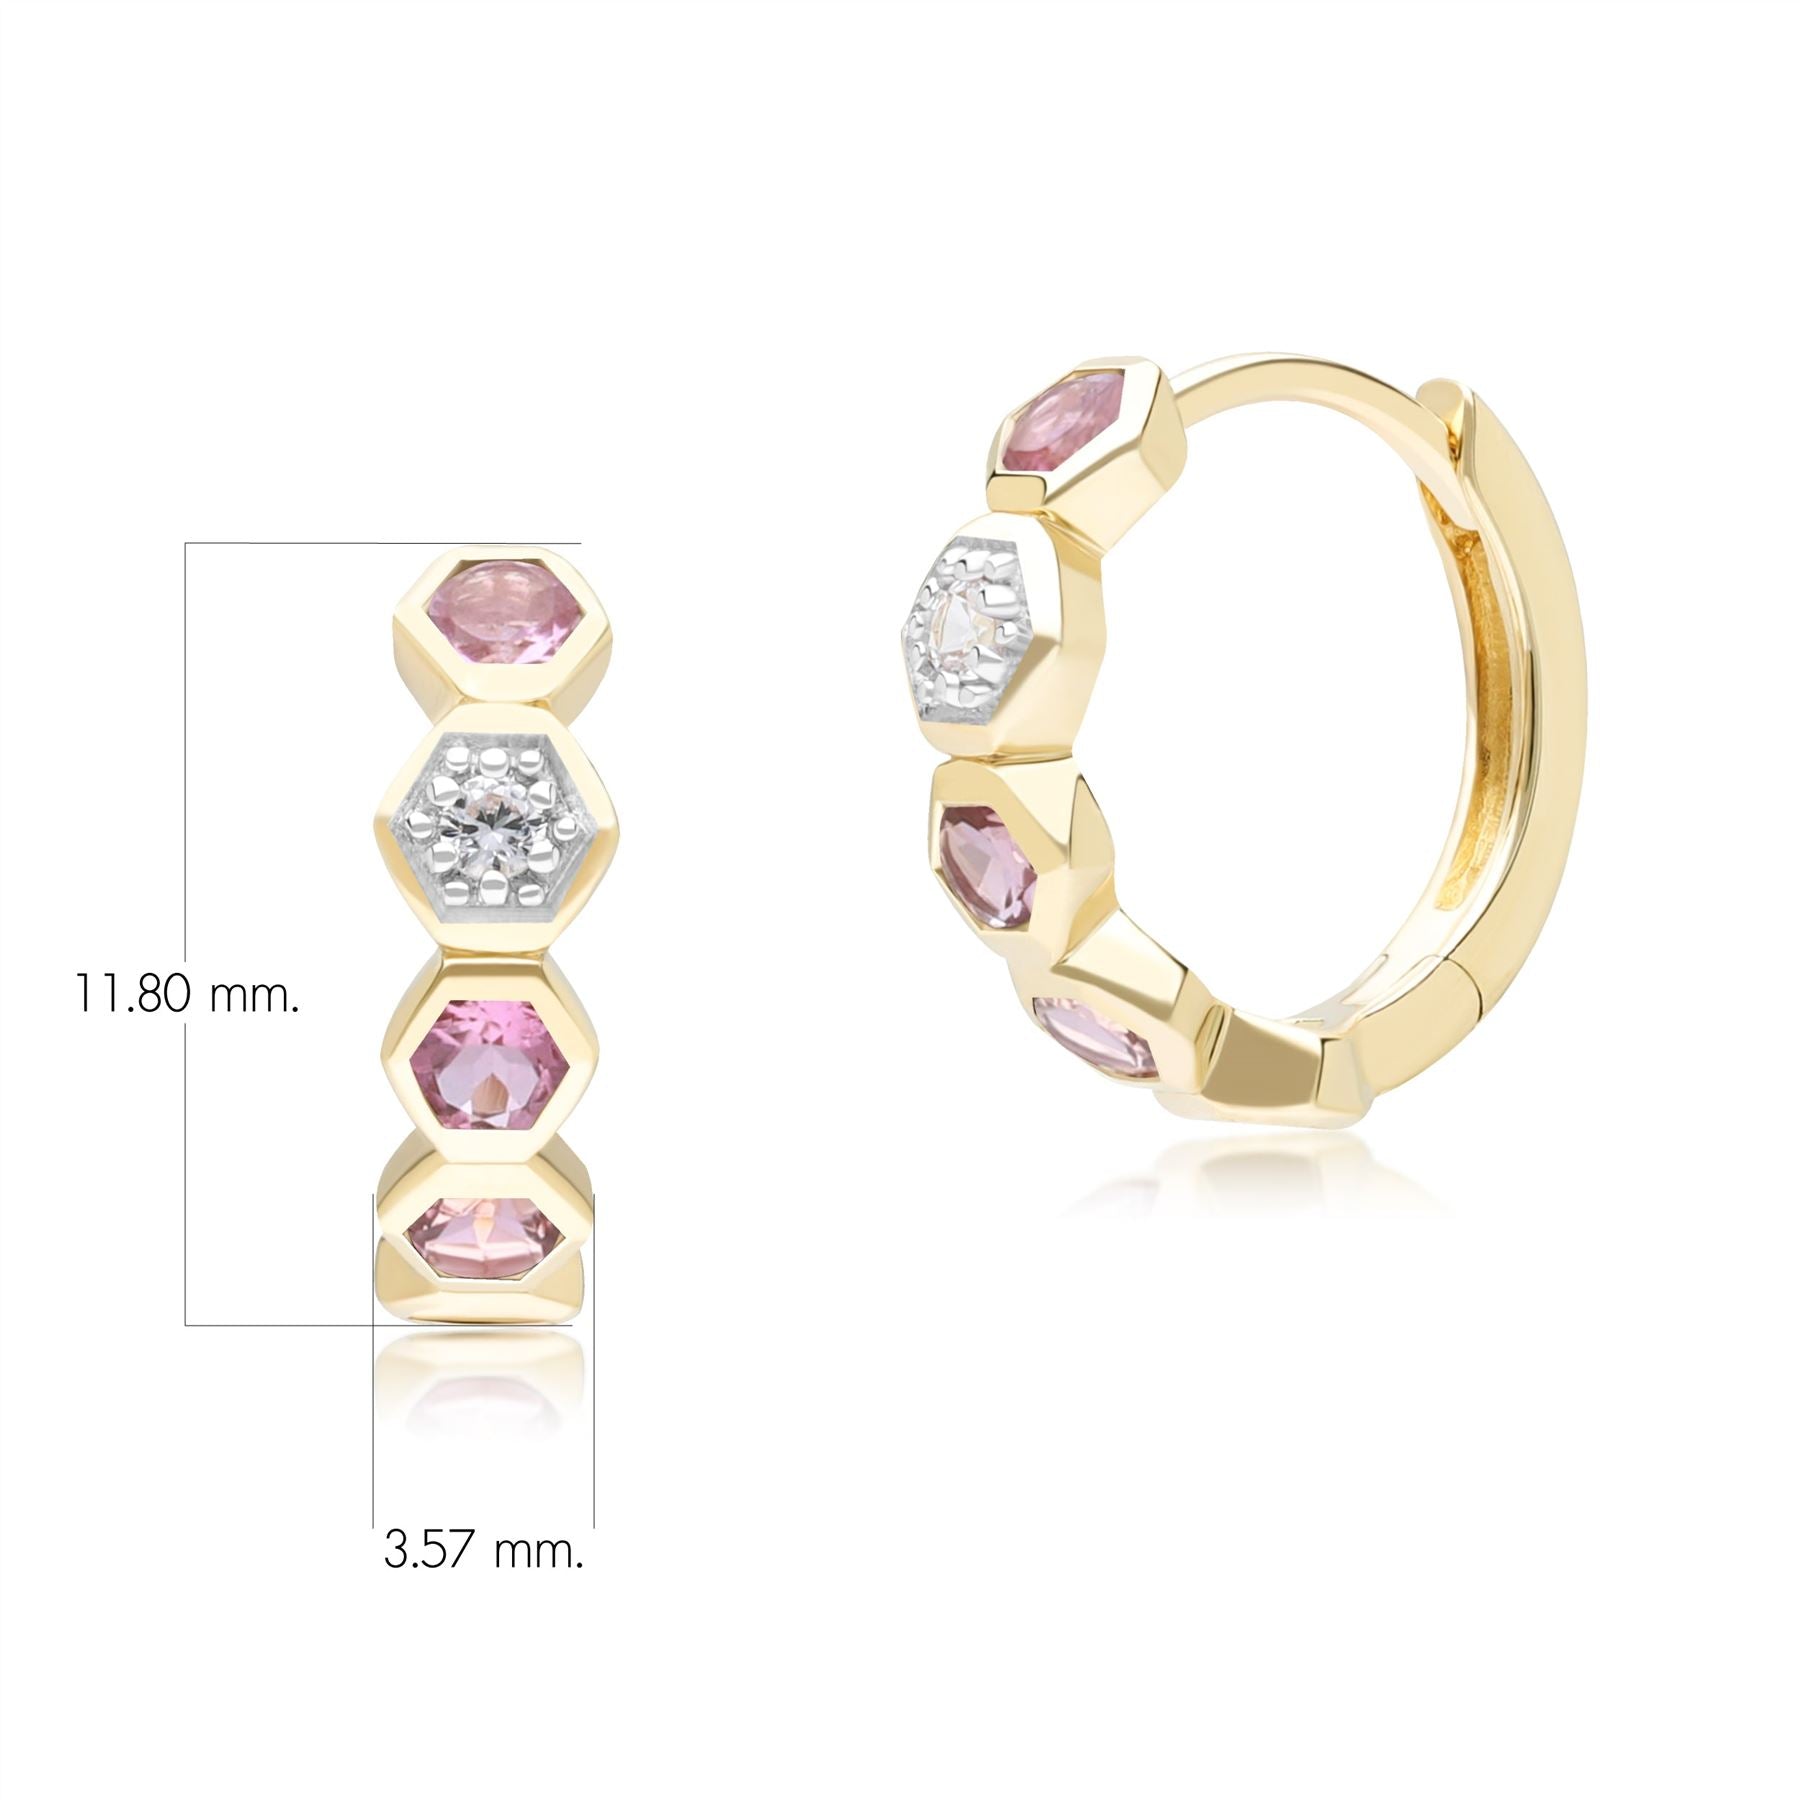 Geometric Round Pink Tourmaline and Sapphire Hoop Earrings in 9ct Yellow Gold Dimensions 